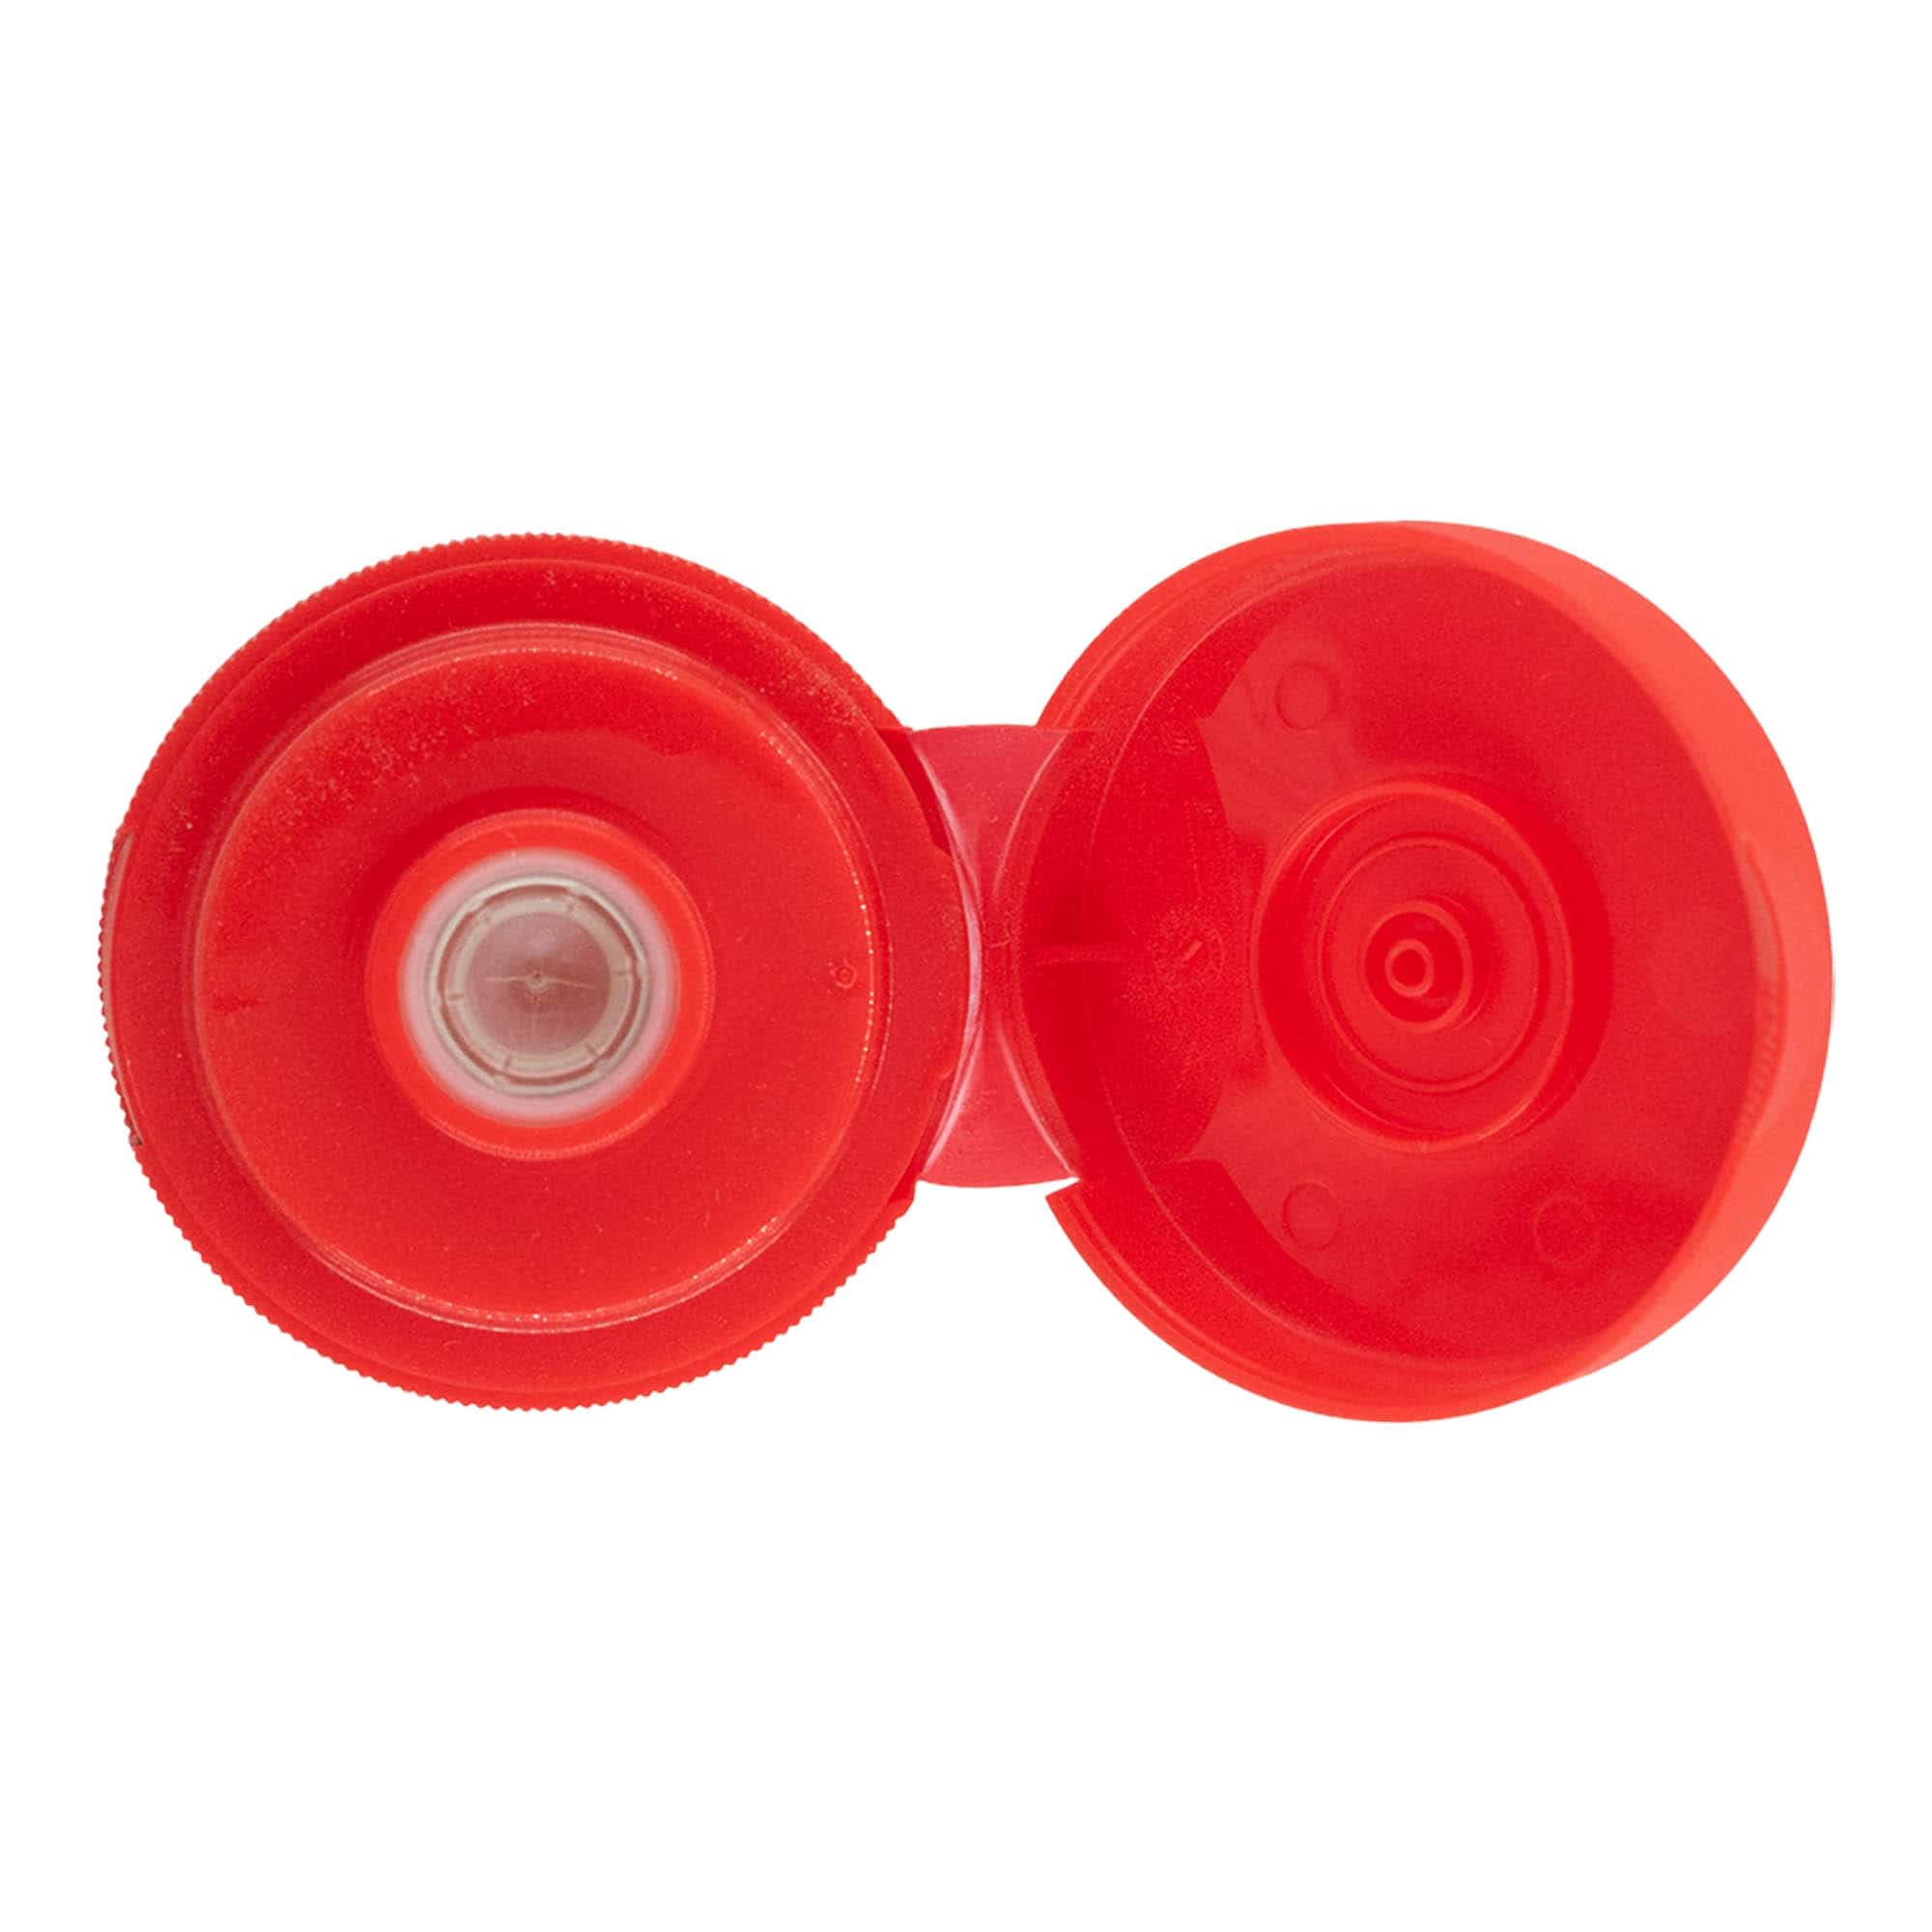 Hinged screw cap, PP plastic, red, for opening: GPI 38/400